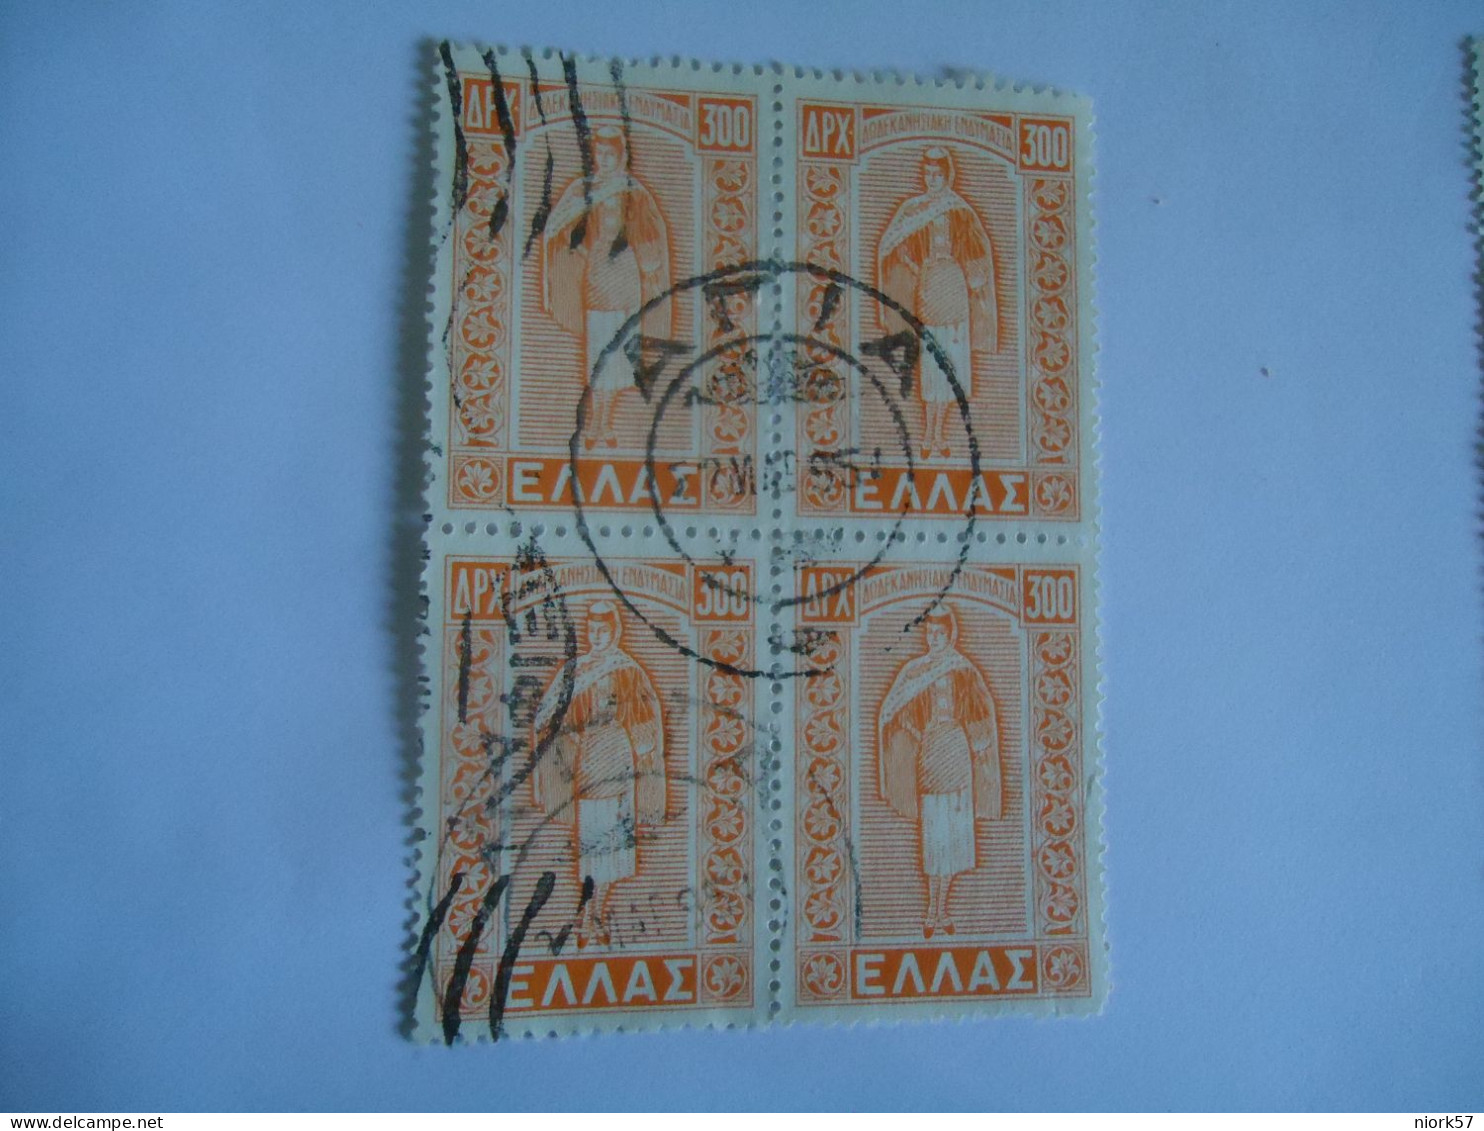 GREECE USED STAMPS 1947 ISLAND UNIONS   BLOCK OF 4 POSTMARK  ΑΓΙΑ - Oblitérés